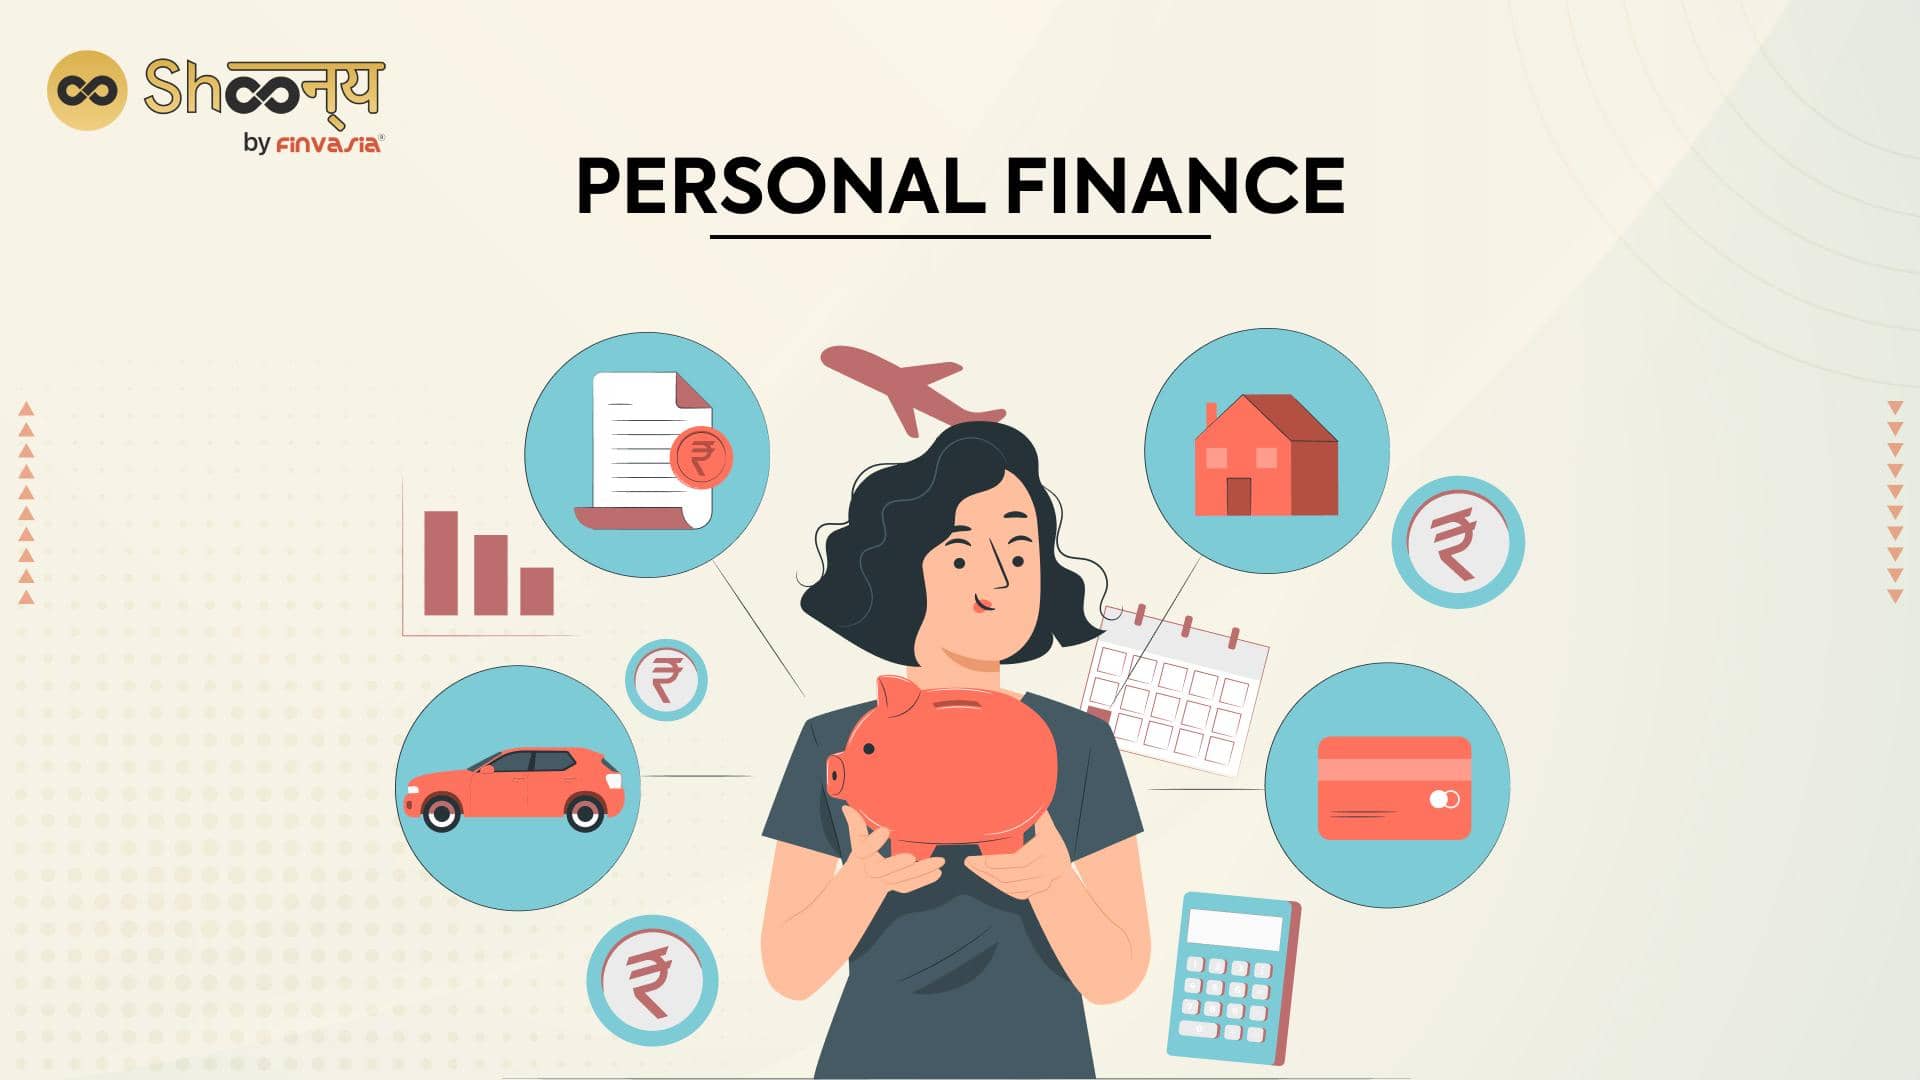 - Utilizing Personal Finance Apps for Goal Setting and Tracking Progress